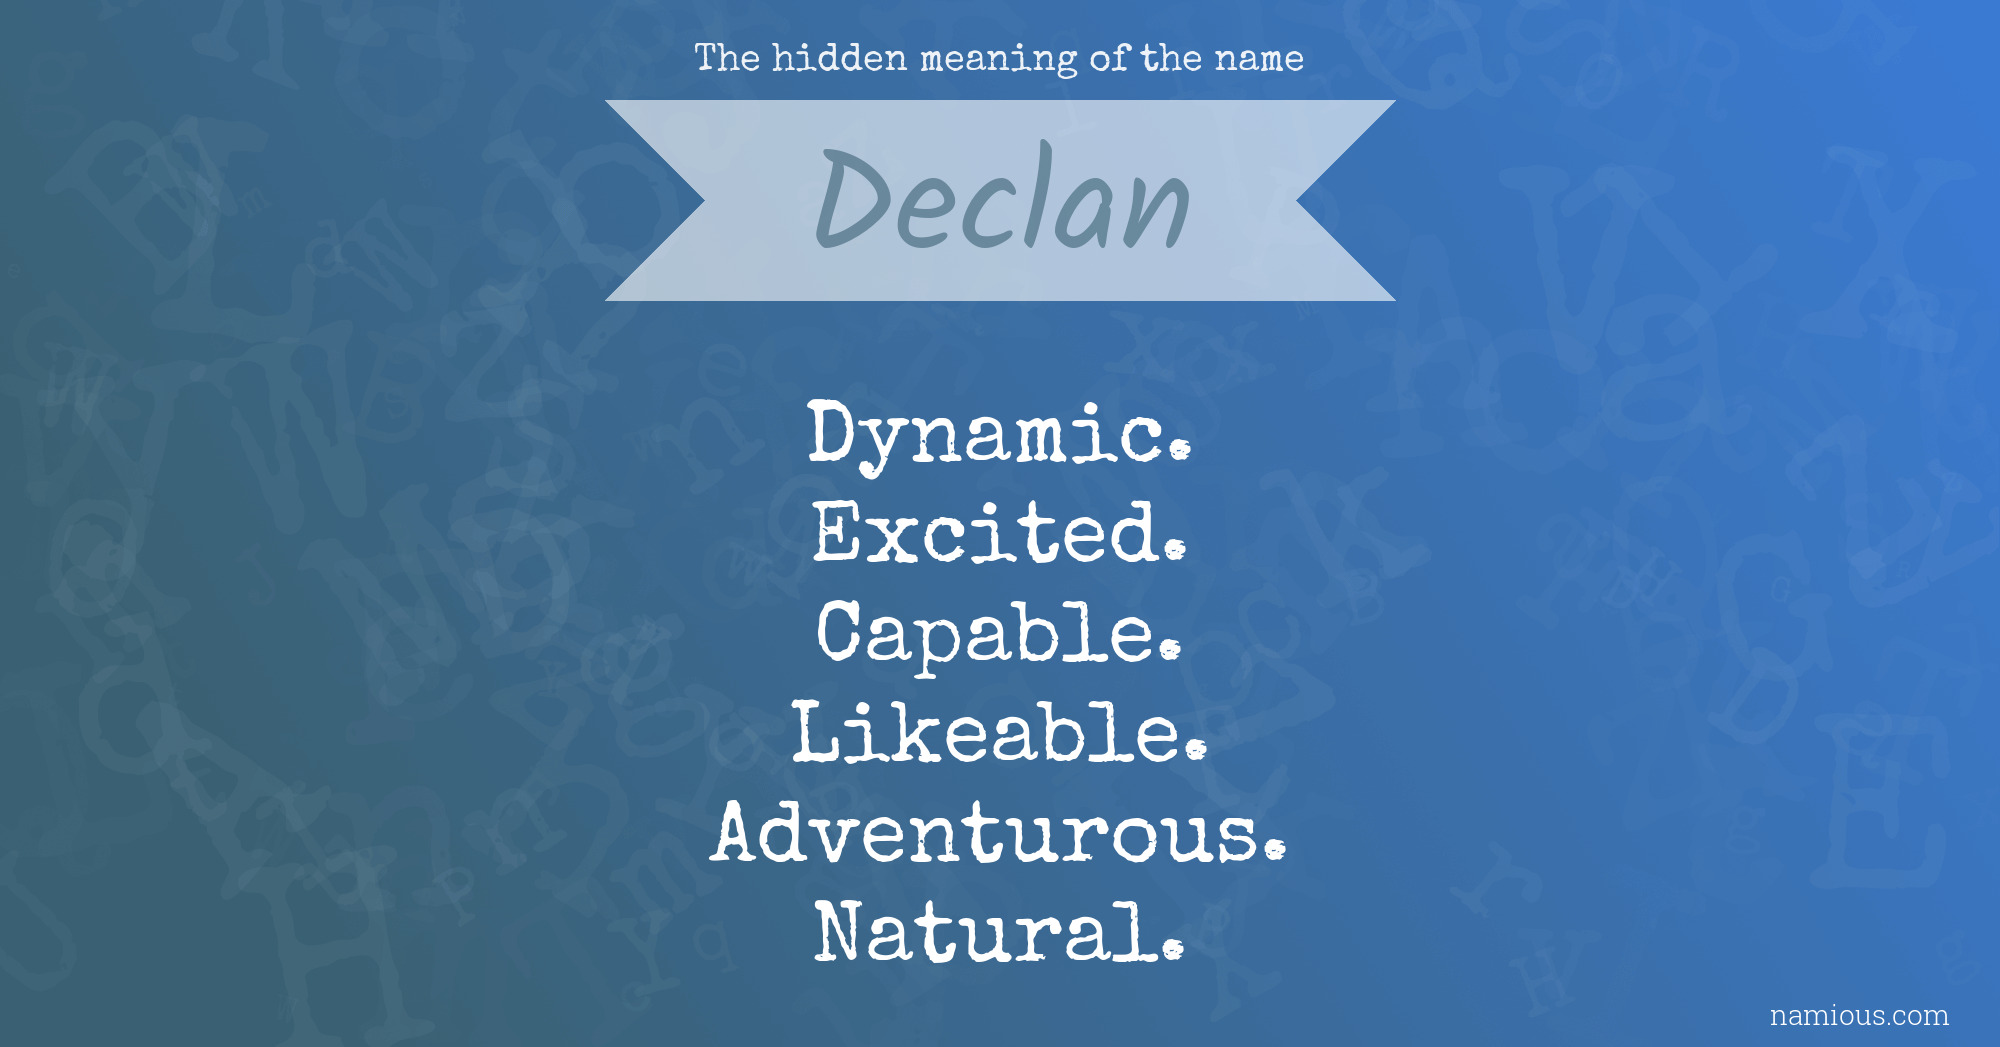 The hidden meaning of the name Declan